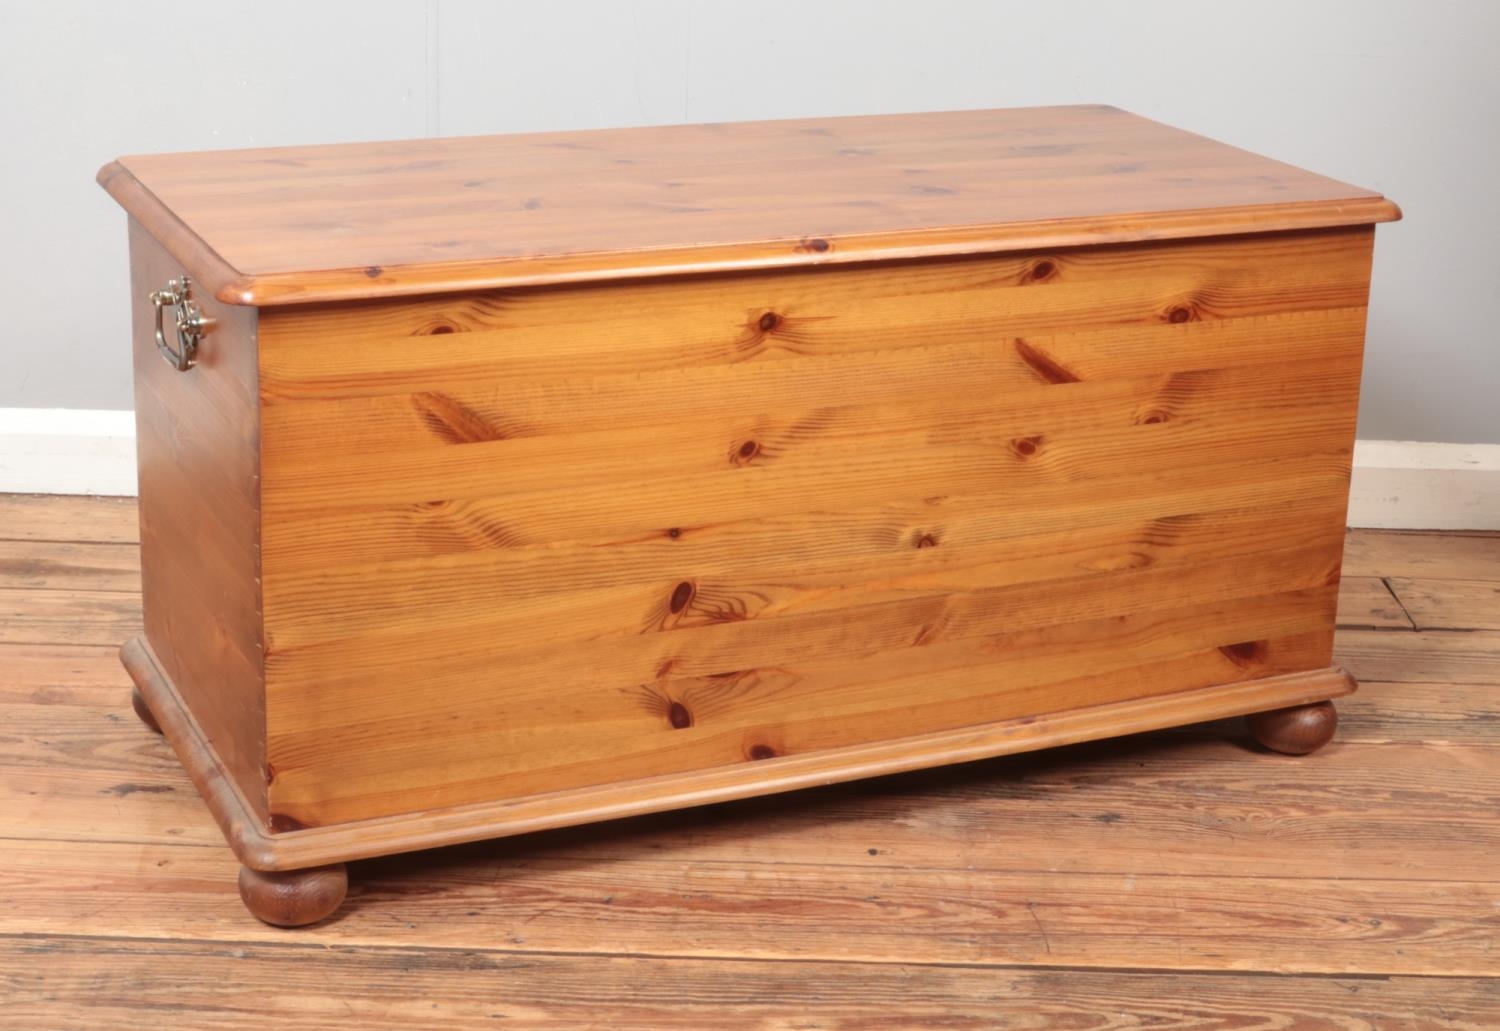 A pine blanket box raised on ball feet featuring decorative brass handles. Approx. dimensions